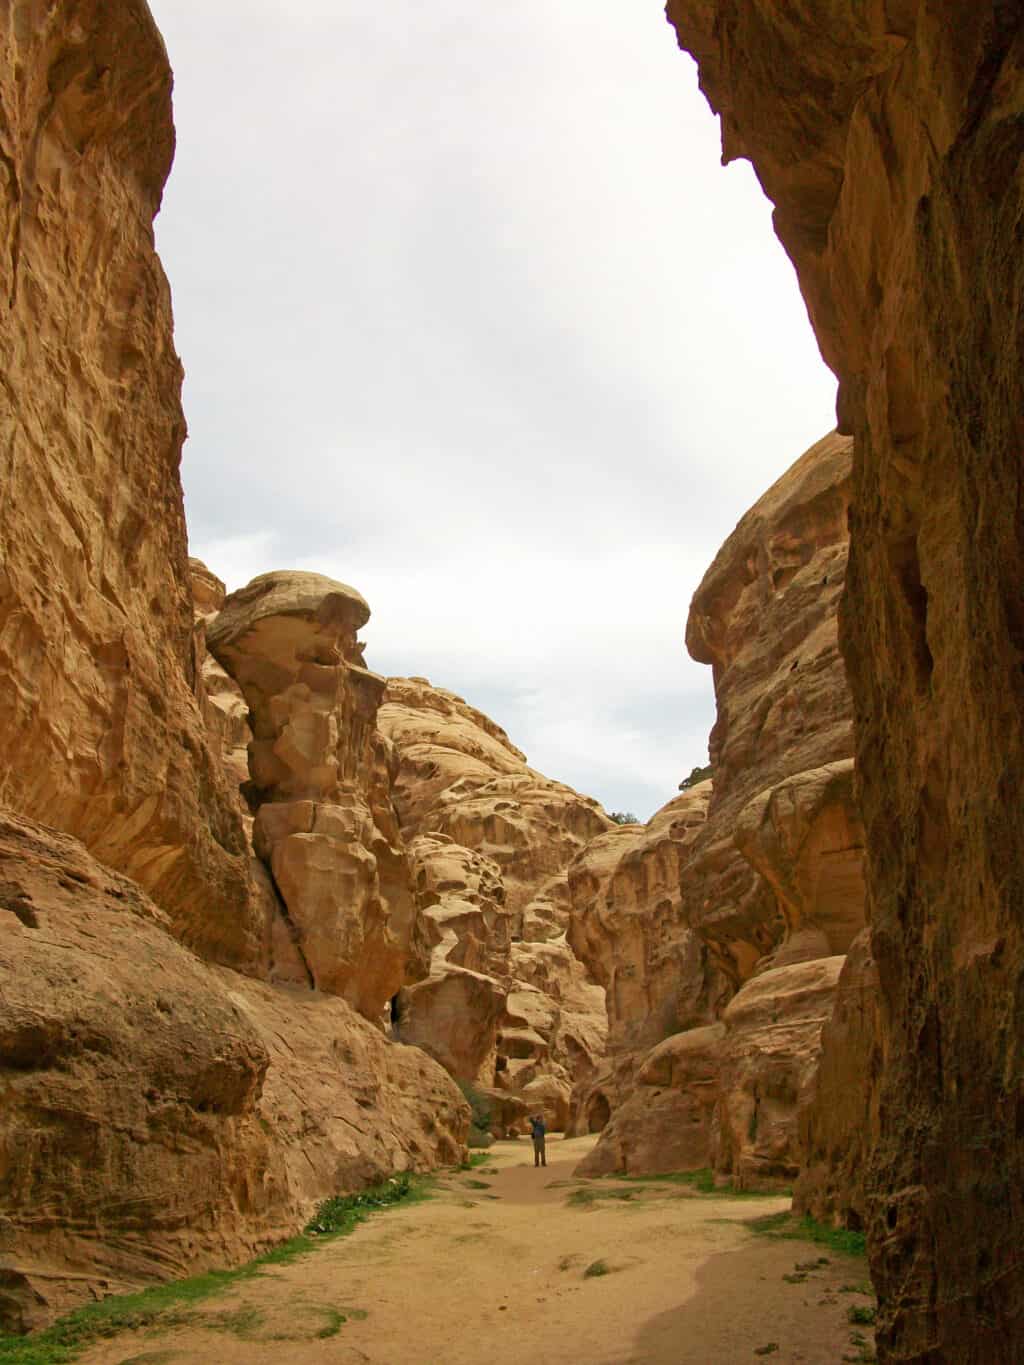 Siiq al-bariid (Cold Canyon) - The entrance to Little Petra in Jordan